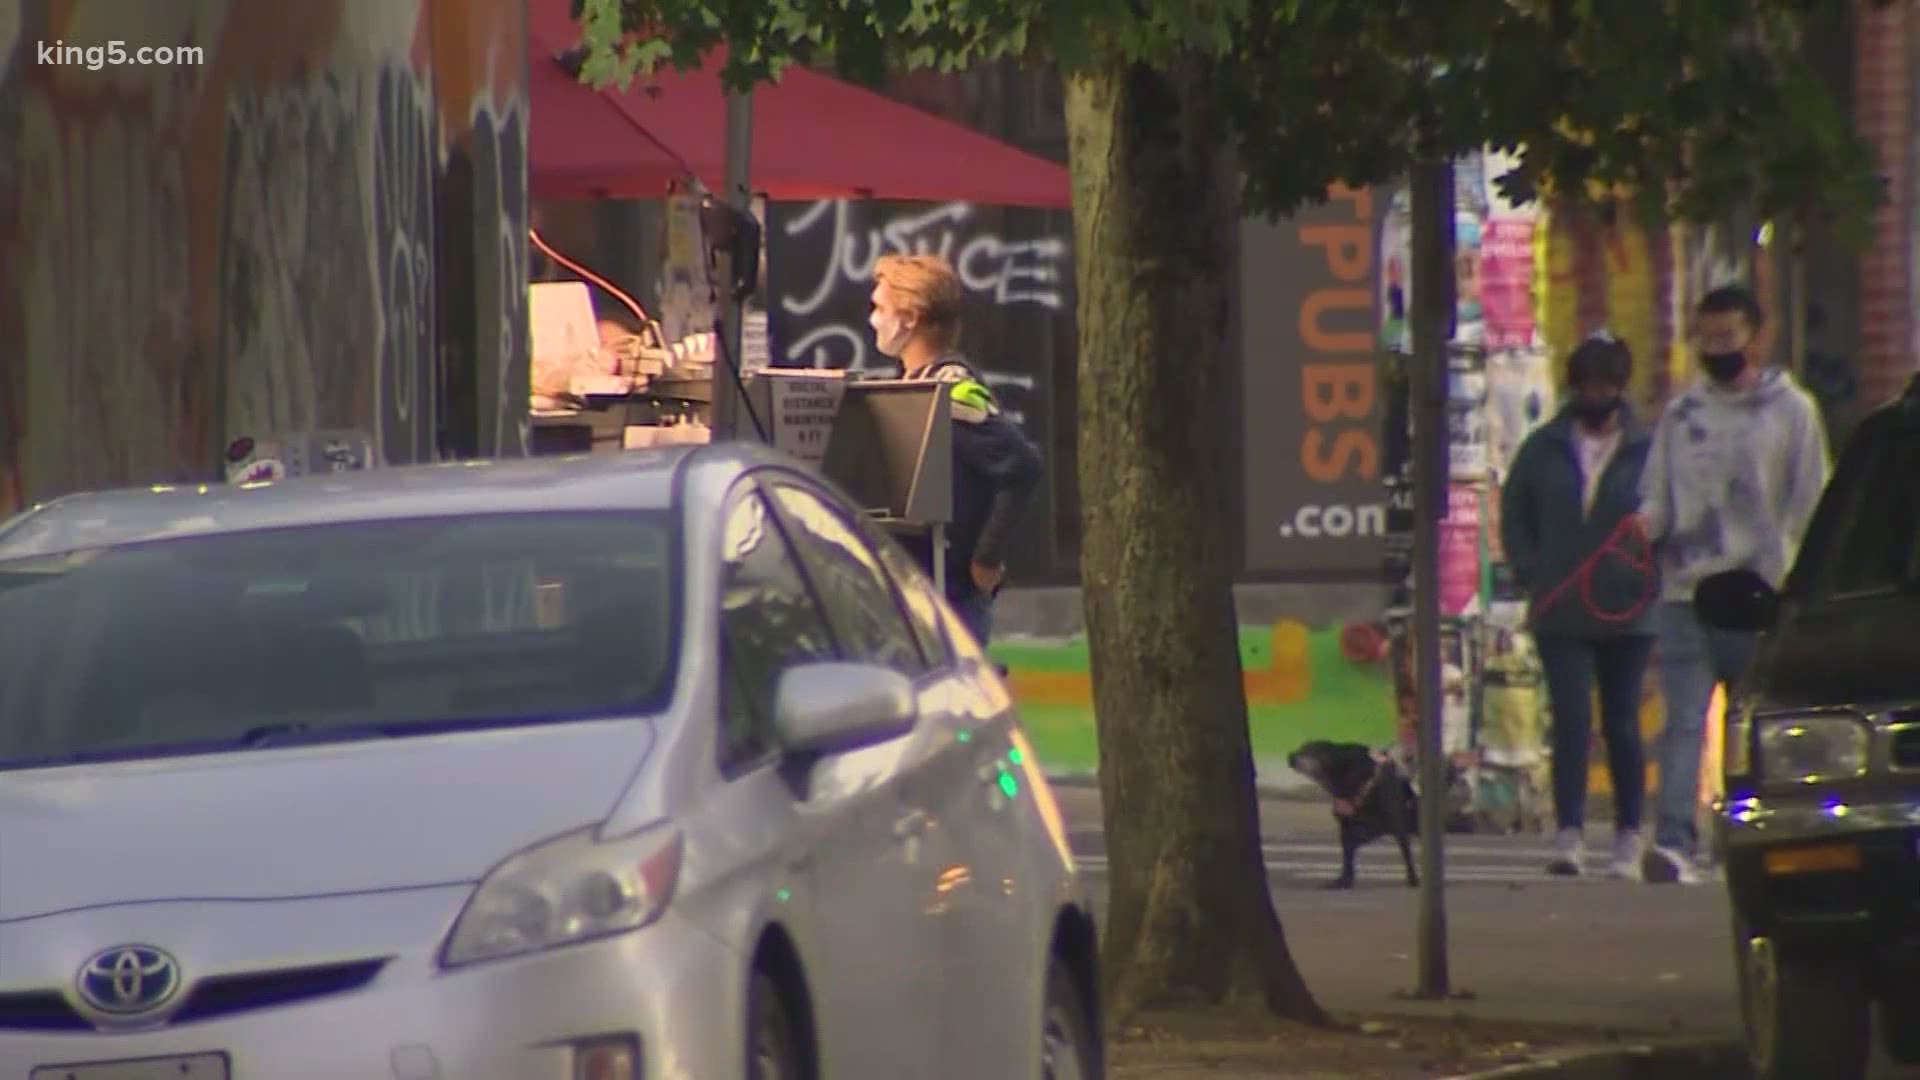 Seattle's business community is hoping the new police chief sticks to his word that the damage won't be tolerated.